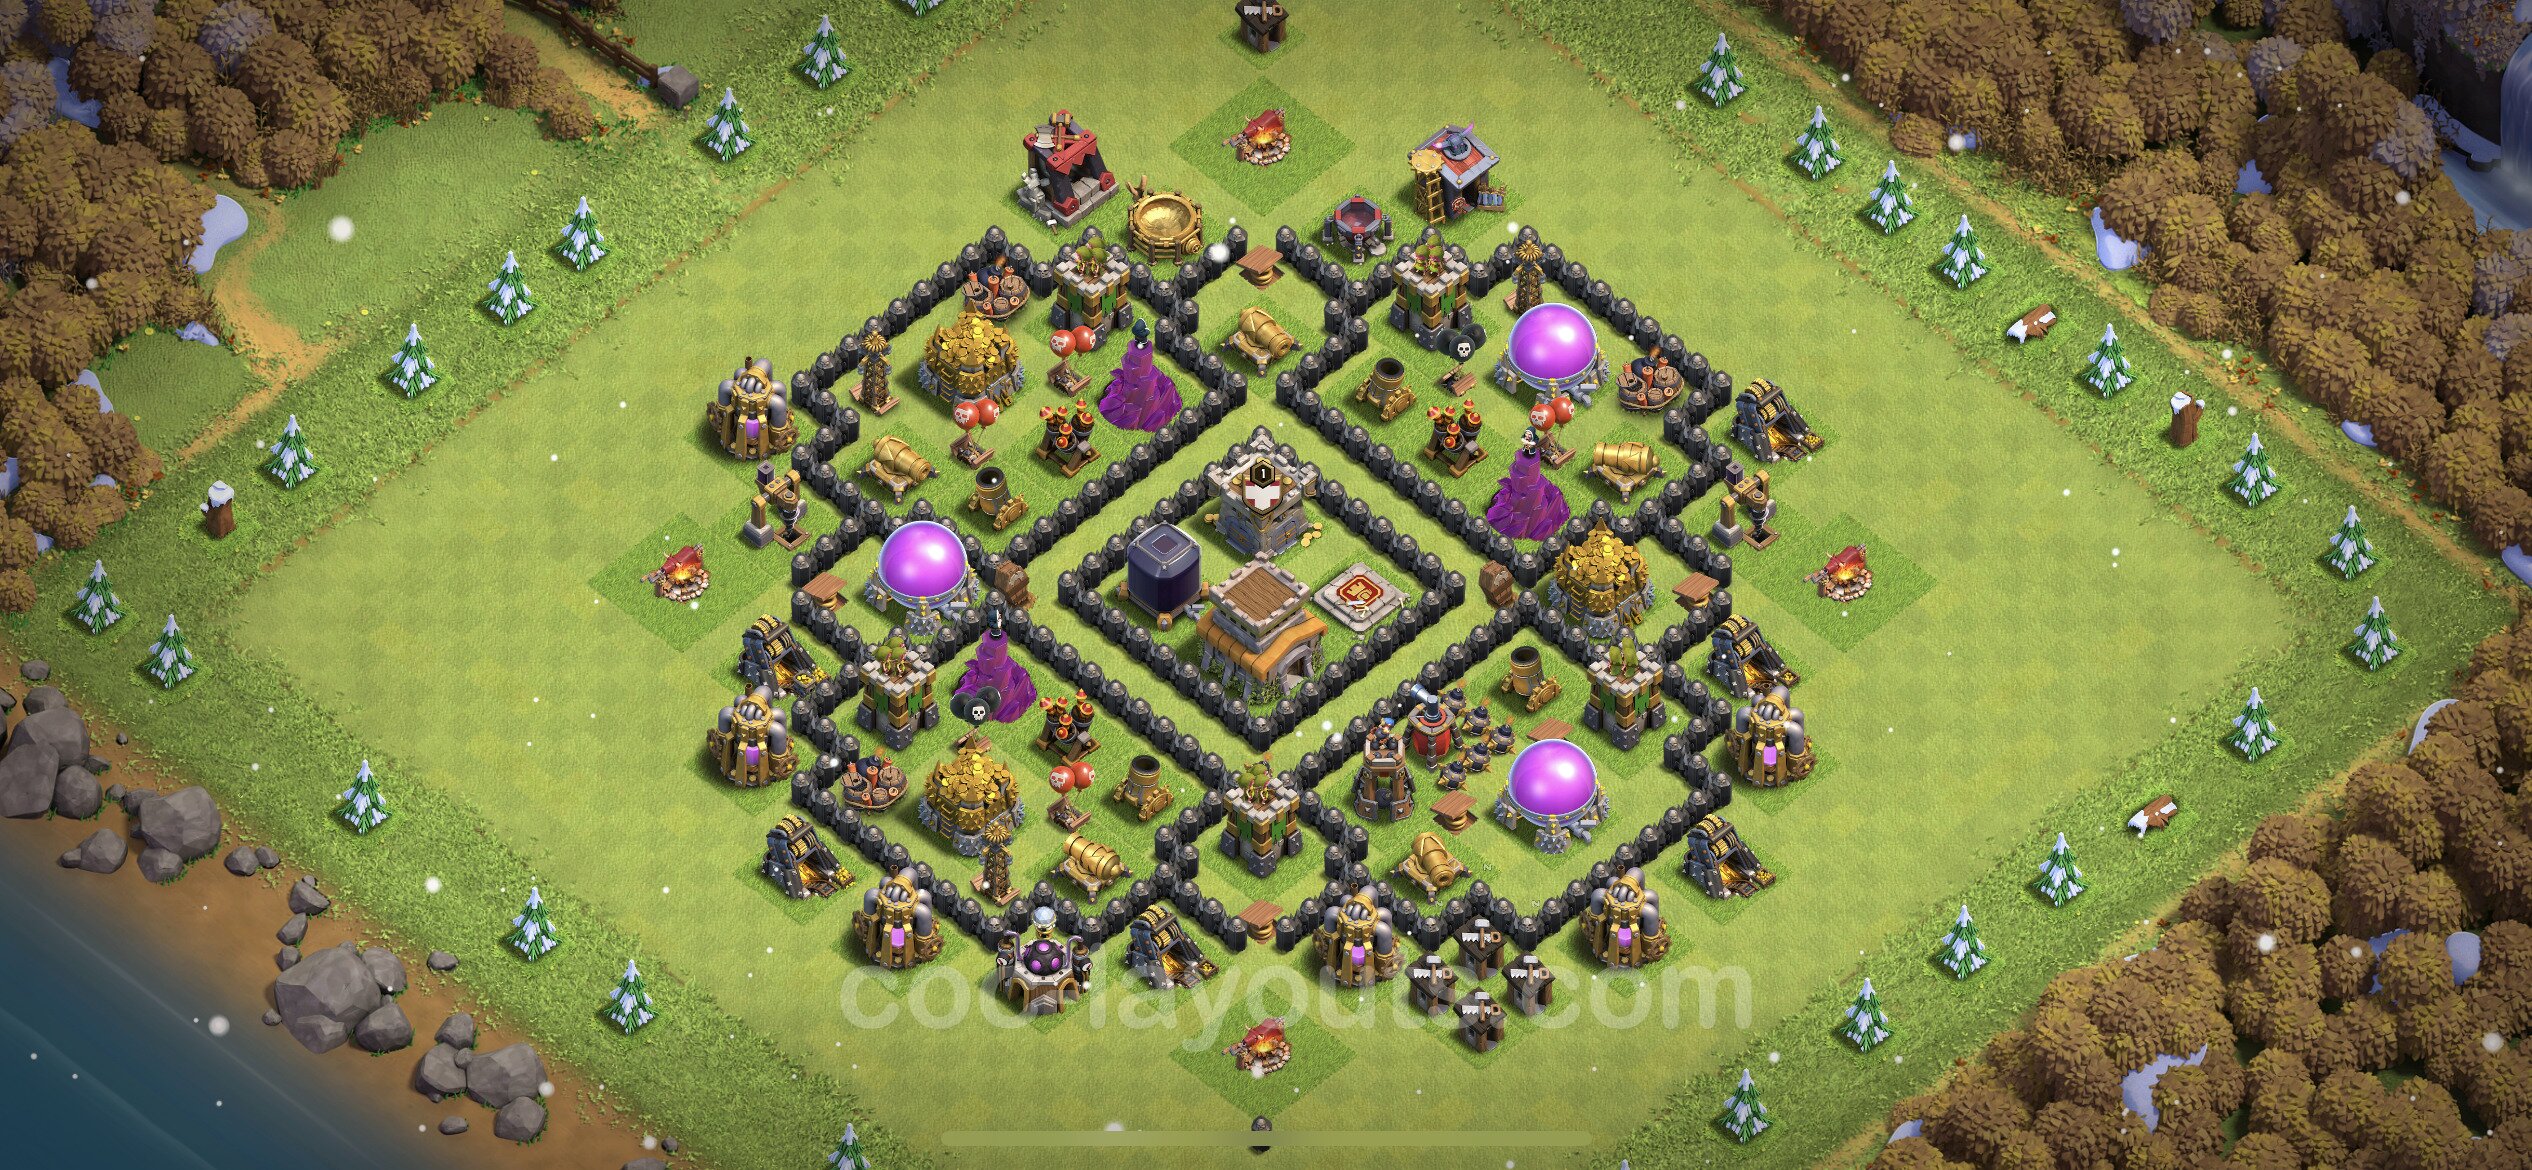 Trophy (Defense) Base TH8 with Link, Anti 2 Stars, Anti Everything.